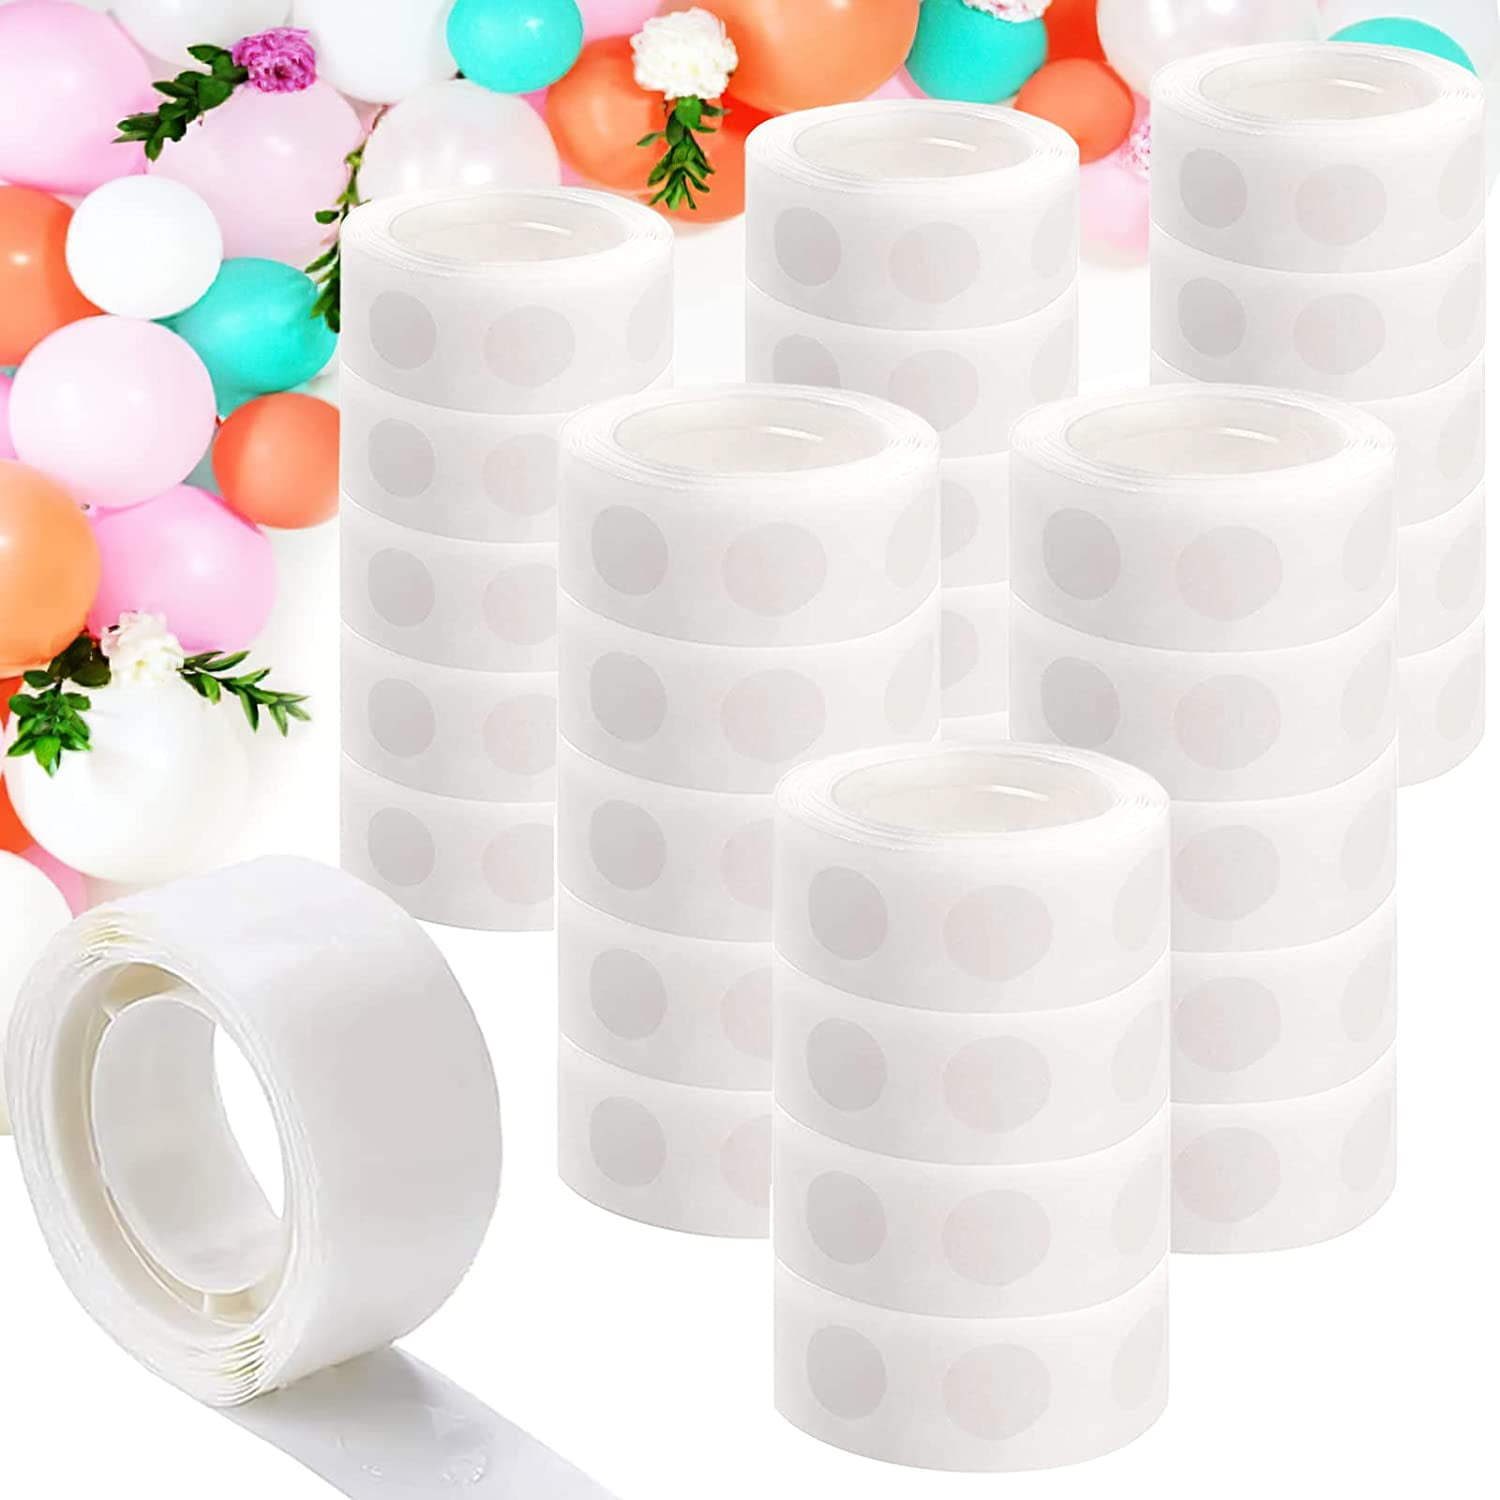 Wenet 1000 Pieces Balloon Glue Dots Double Sided Adhesive Dots Stickers Tape For